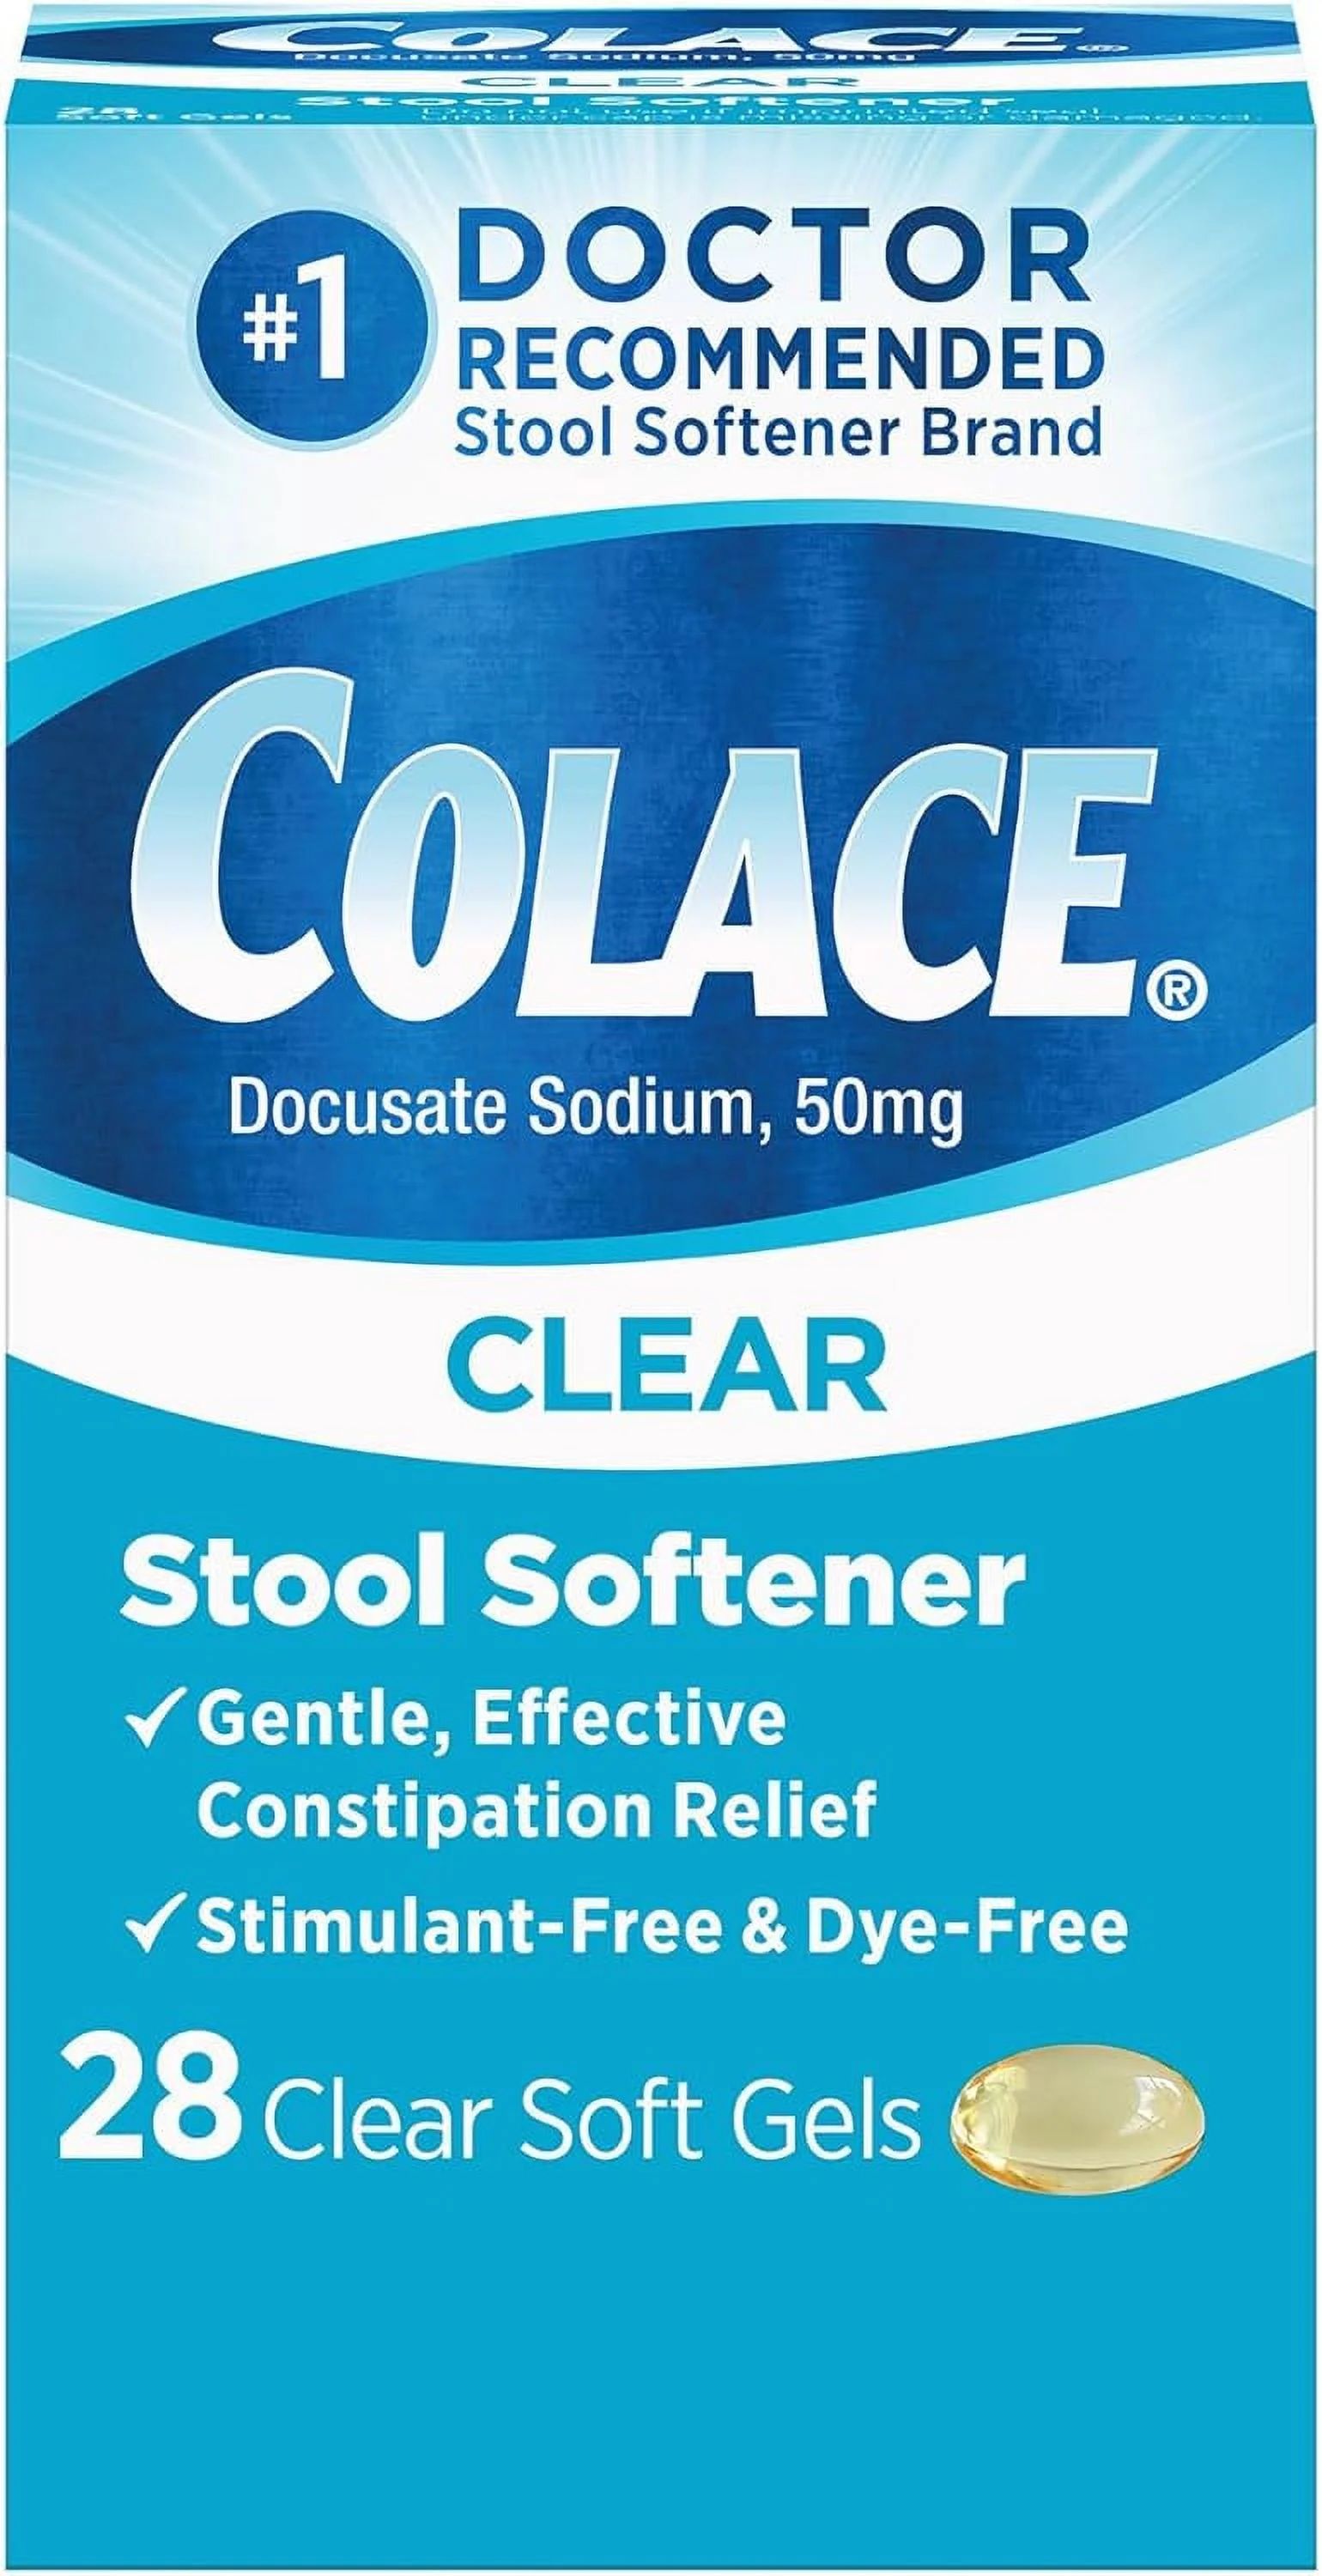 Colace Clear Stool Softener Soft Gel Capsules Constipation Relief 50mg Docusate Sodium, 28 Ct | Walmart (US)